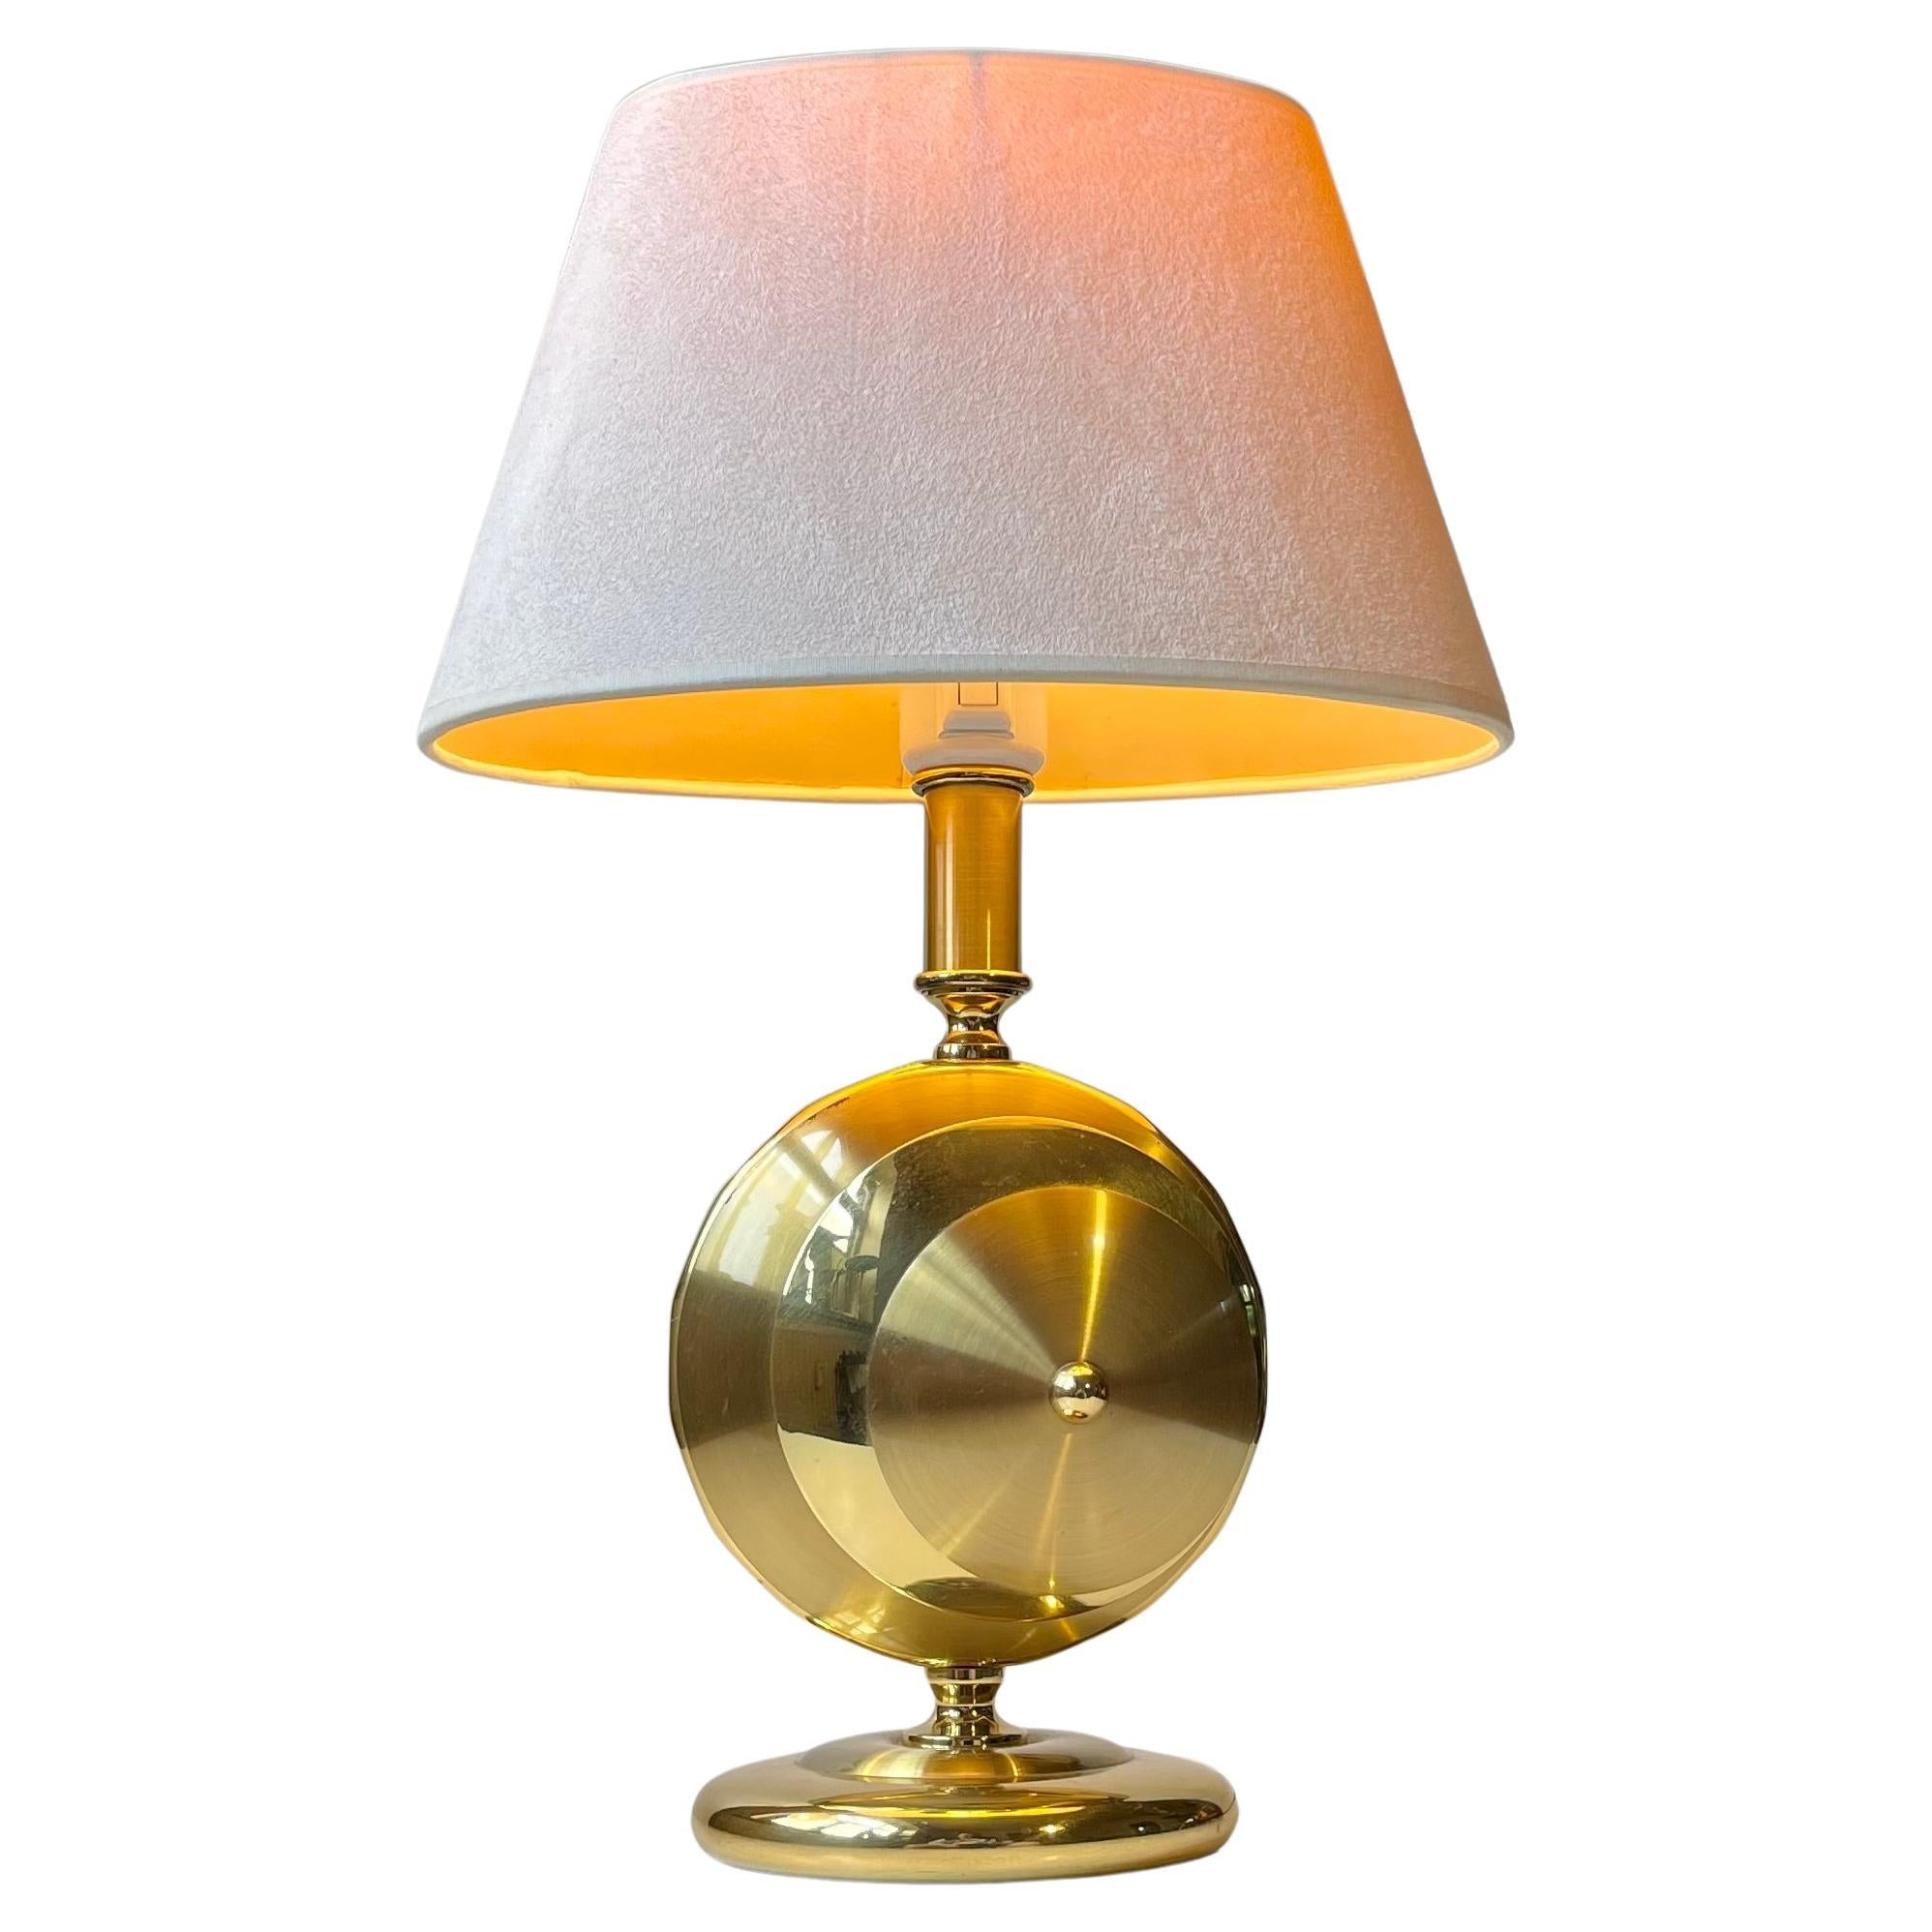 Art Deco Revival Mantle Table Lamp in Brass by TS Belysning, 1980s For Sale